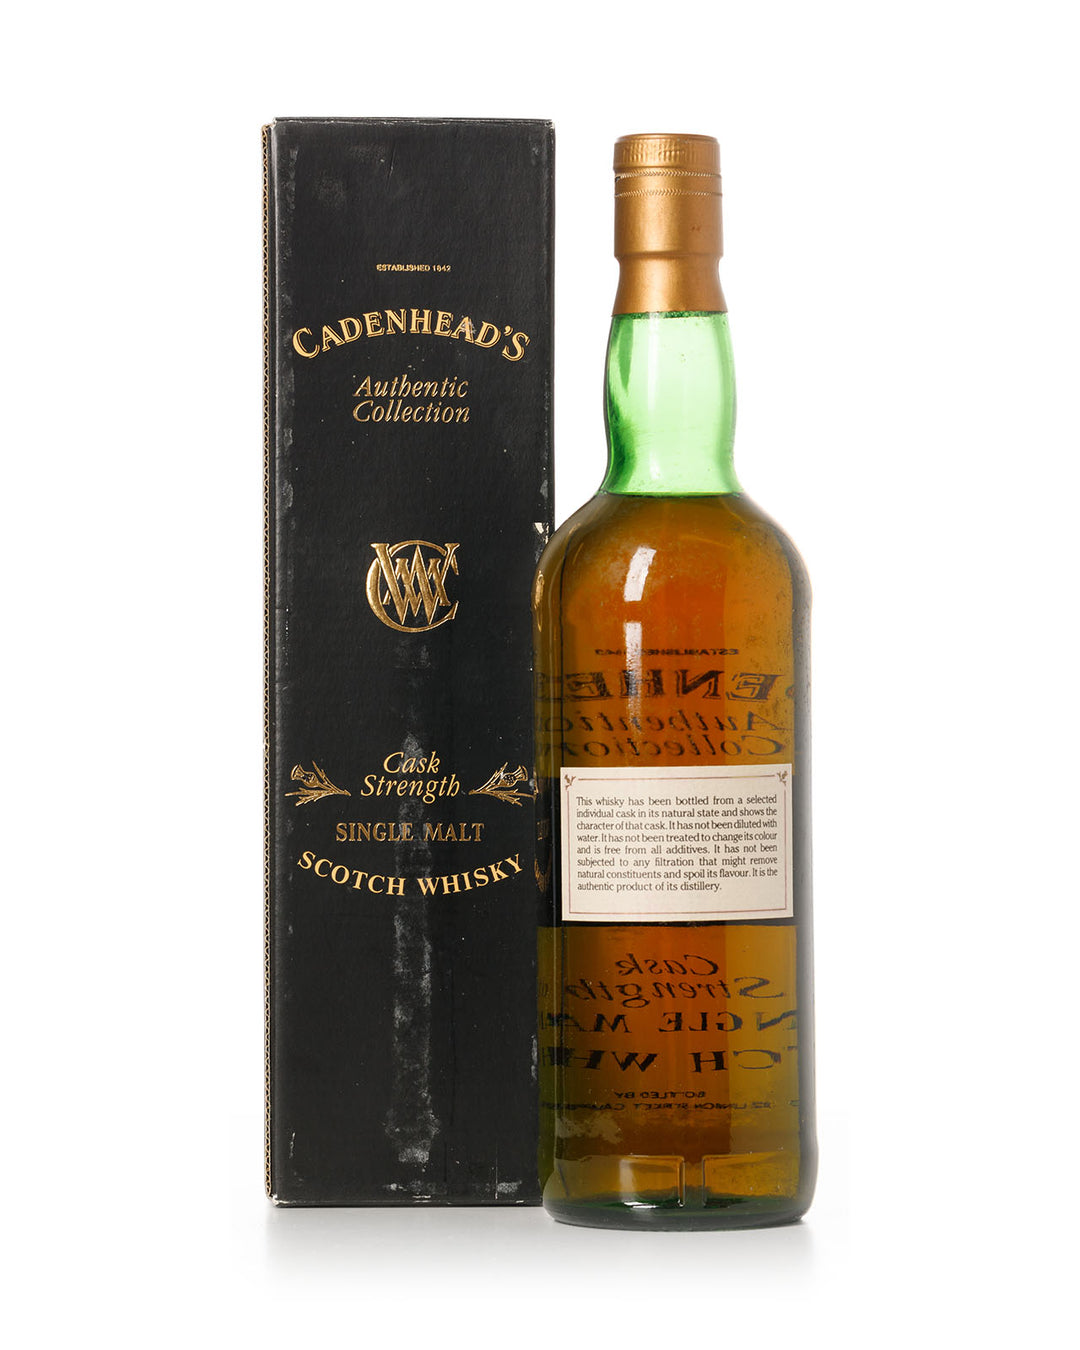 Macallan 1979 13 Year Old Cadenhead's Authentic Collection Bottled in 1992 With Original Box